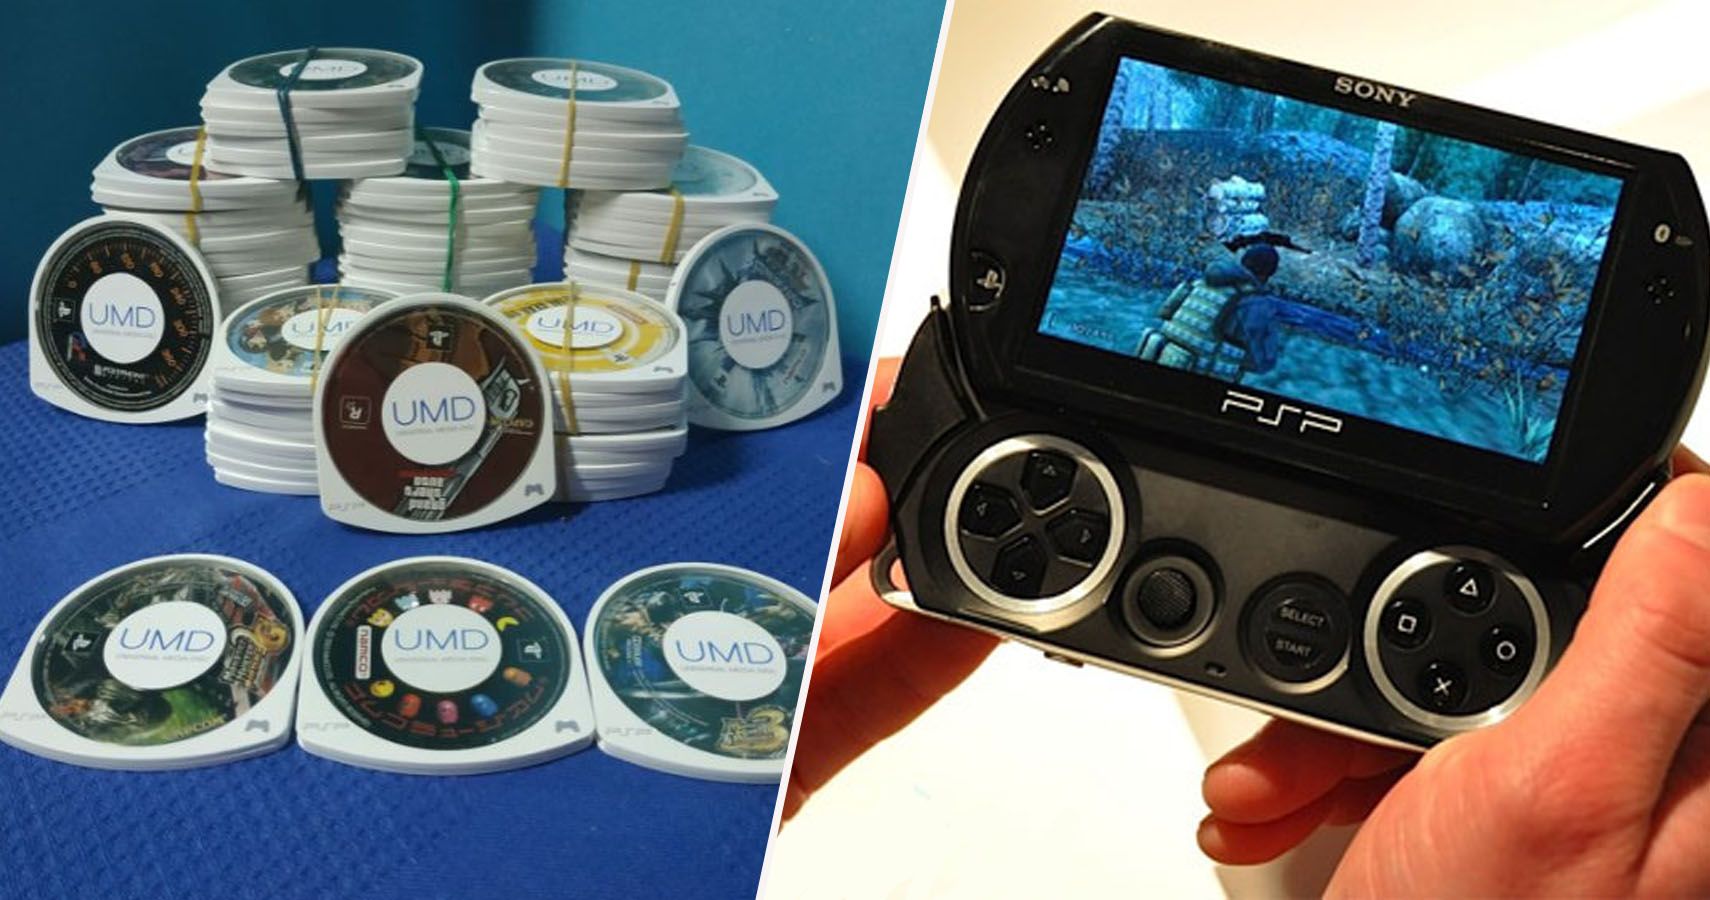 5 Things Sony Got Right With The PSP (and 5 Things They Should Have Changed)